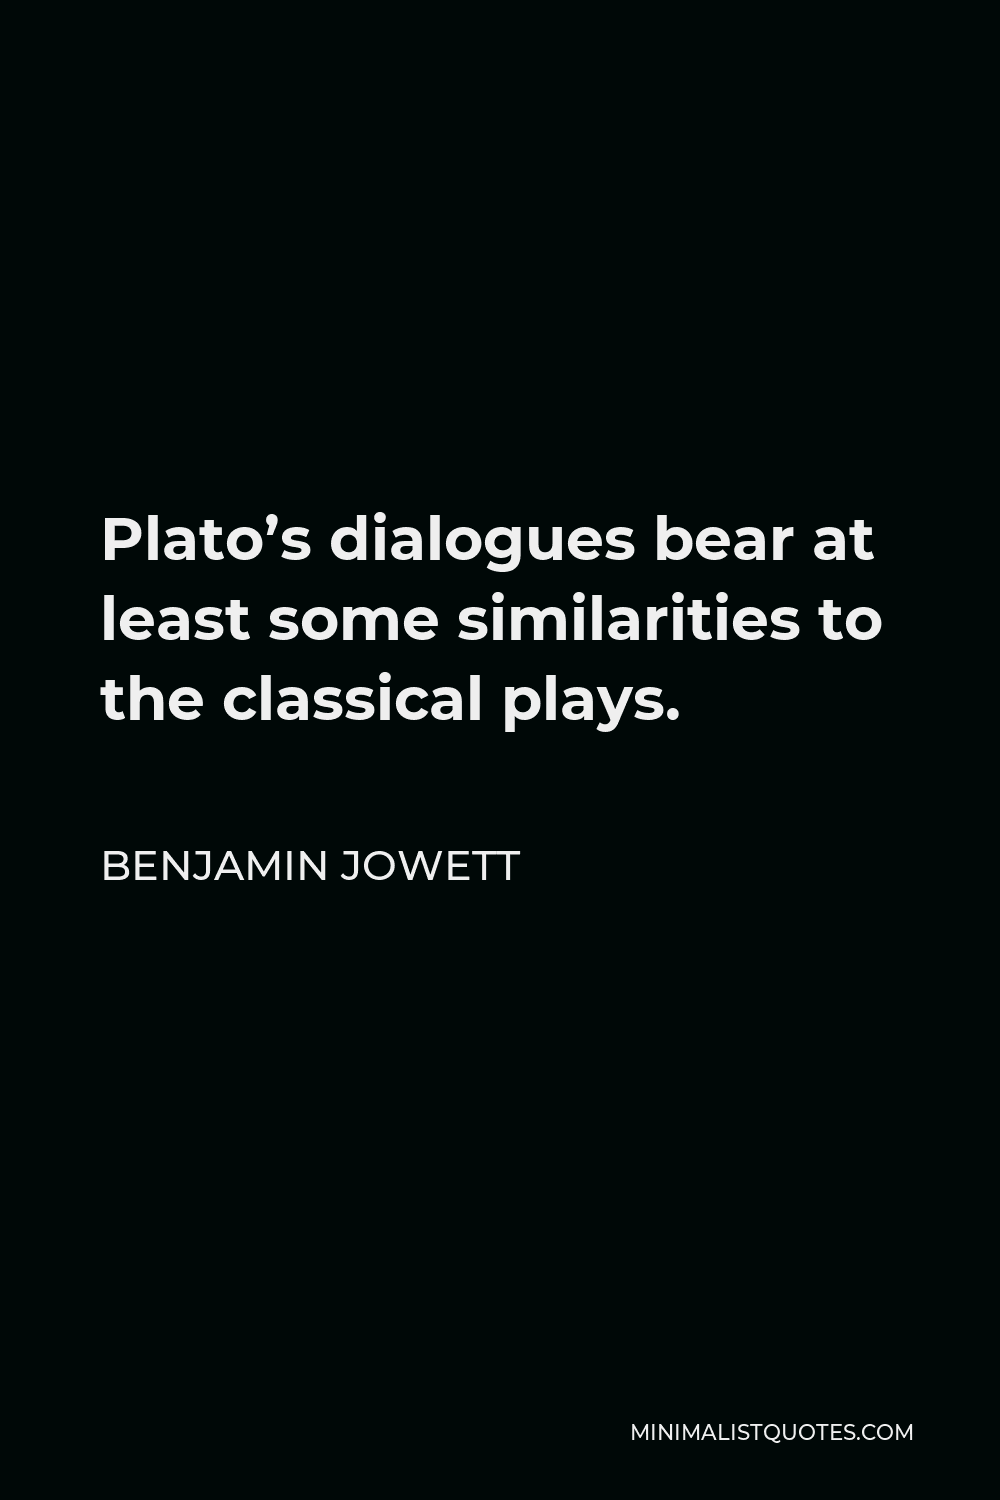 Benjamin Jowett Quote - Plato’s dialogues bear at least some similarities to the classical plays.